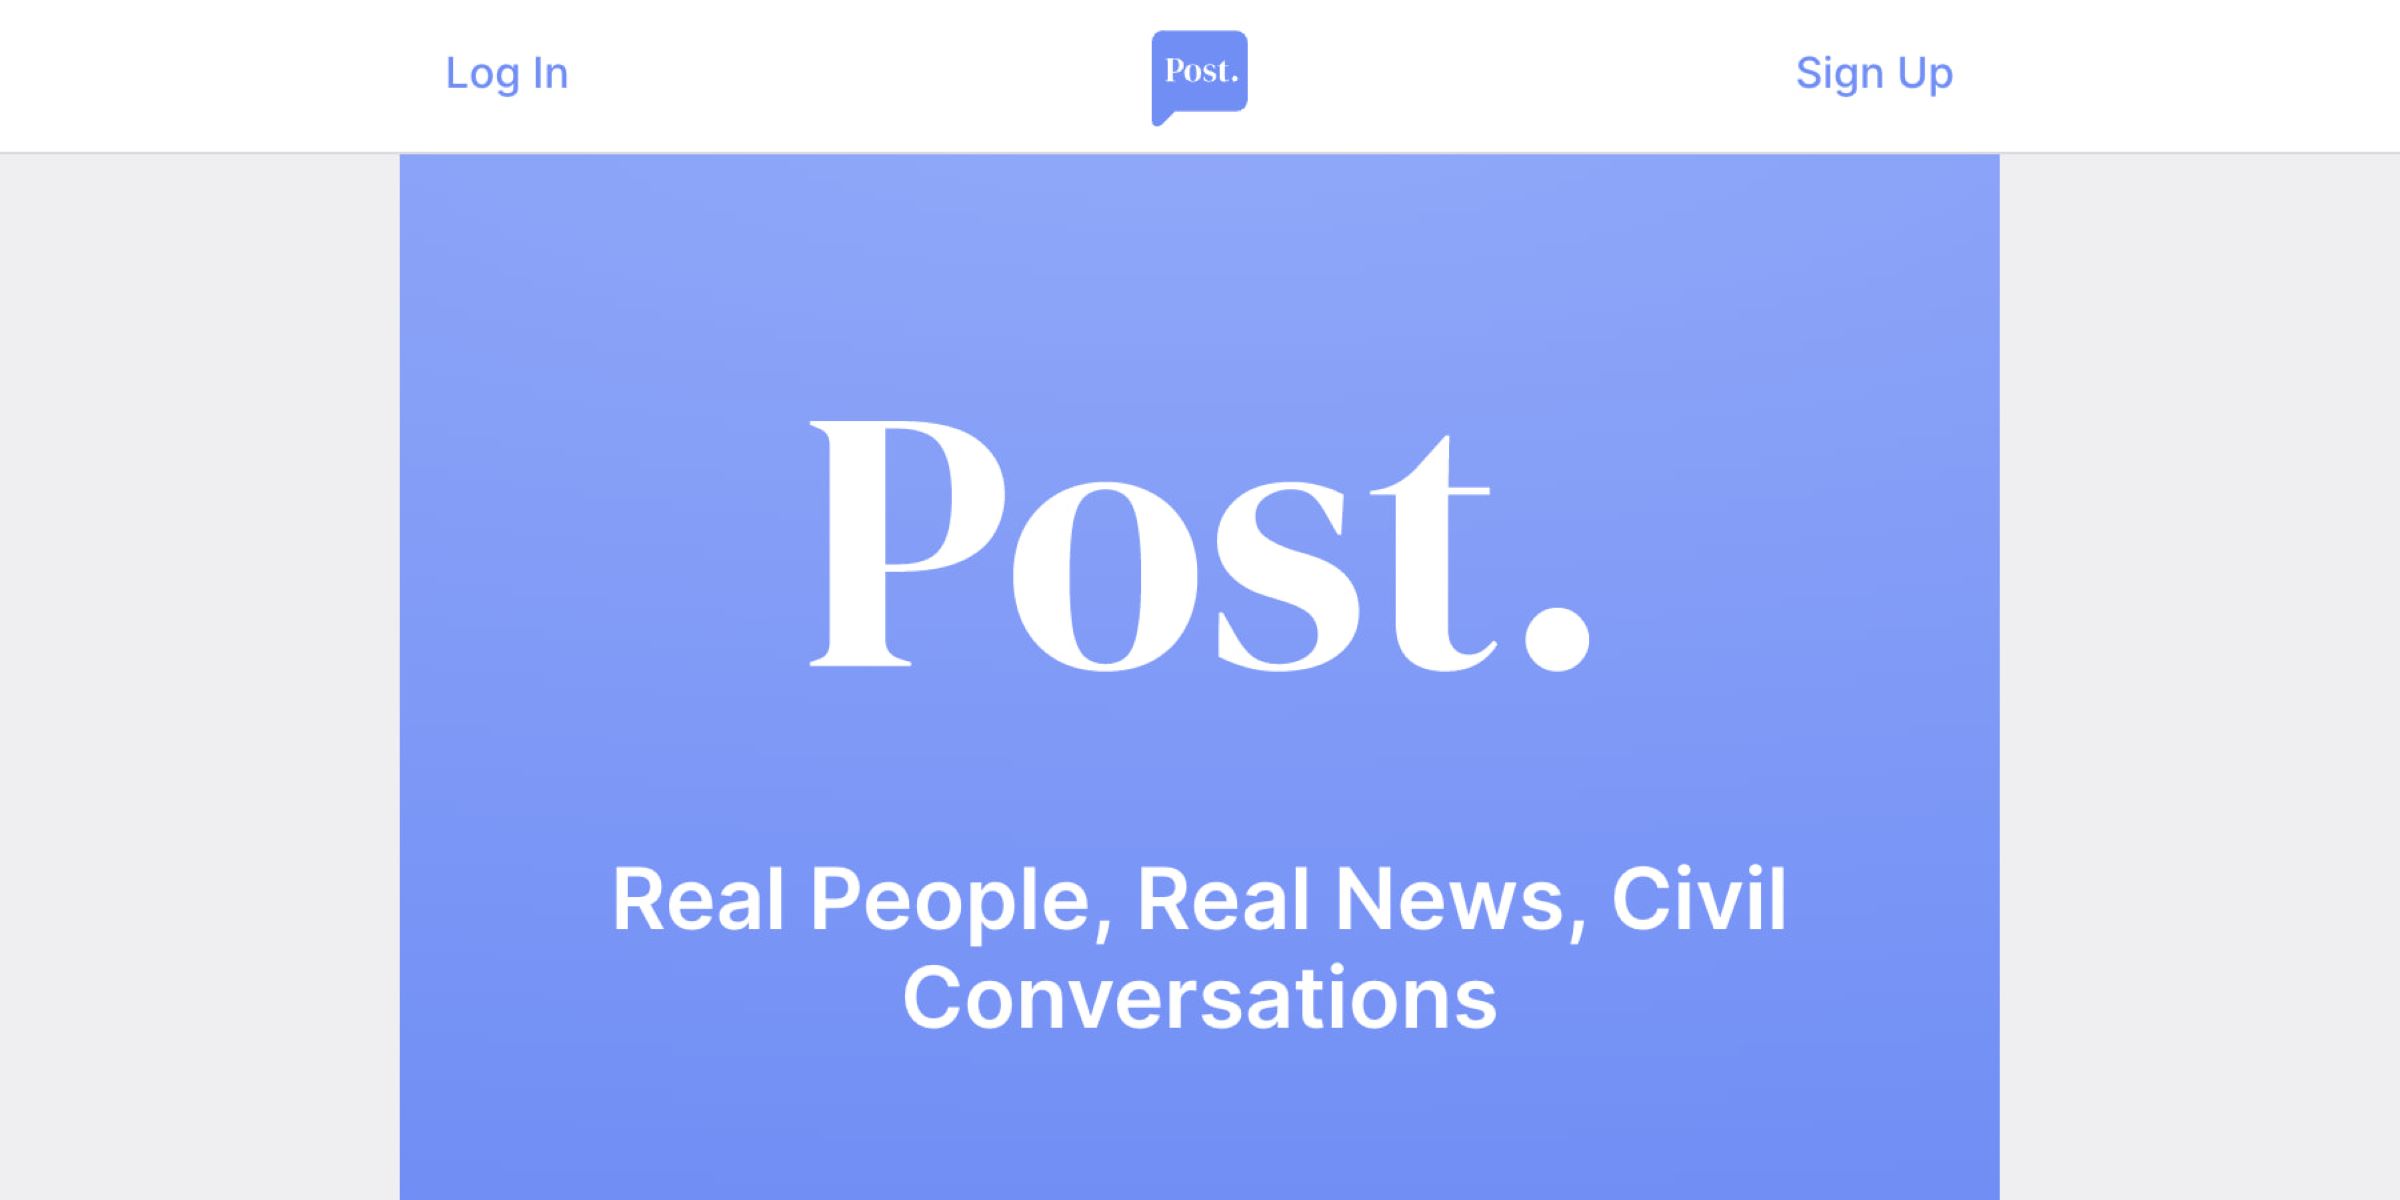 Social News-Sharing Platform Post Launches On Android With New Creator Tools